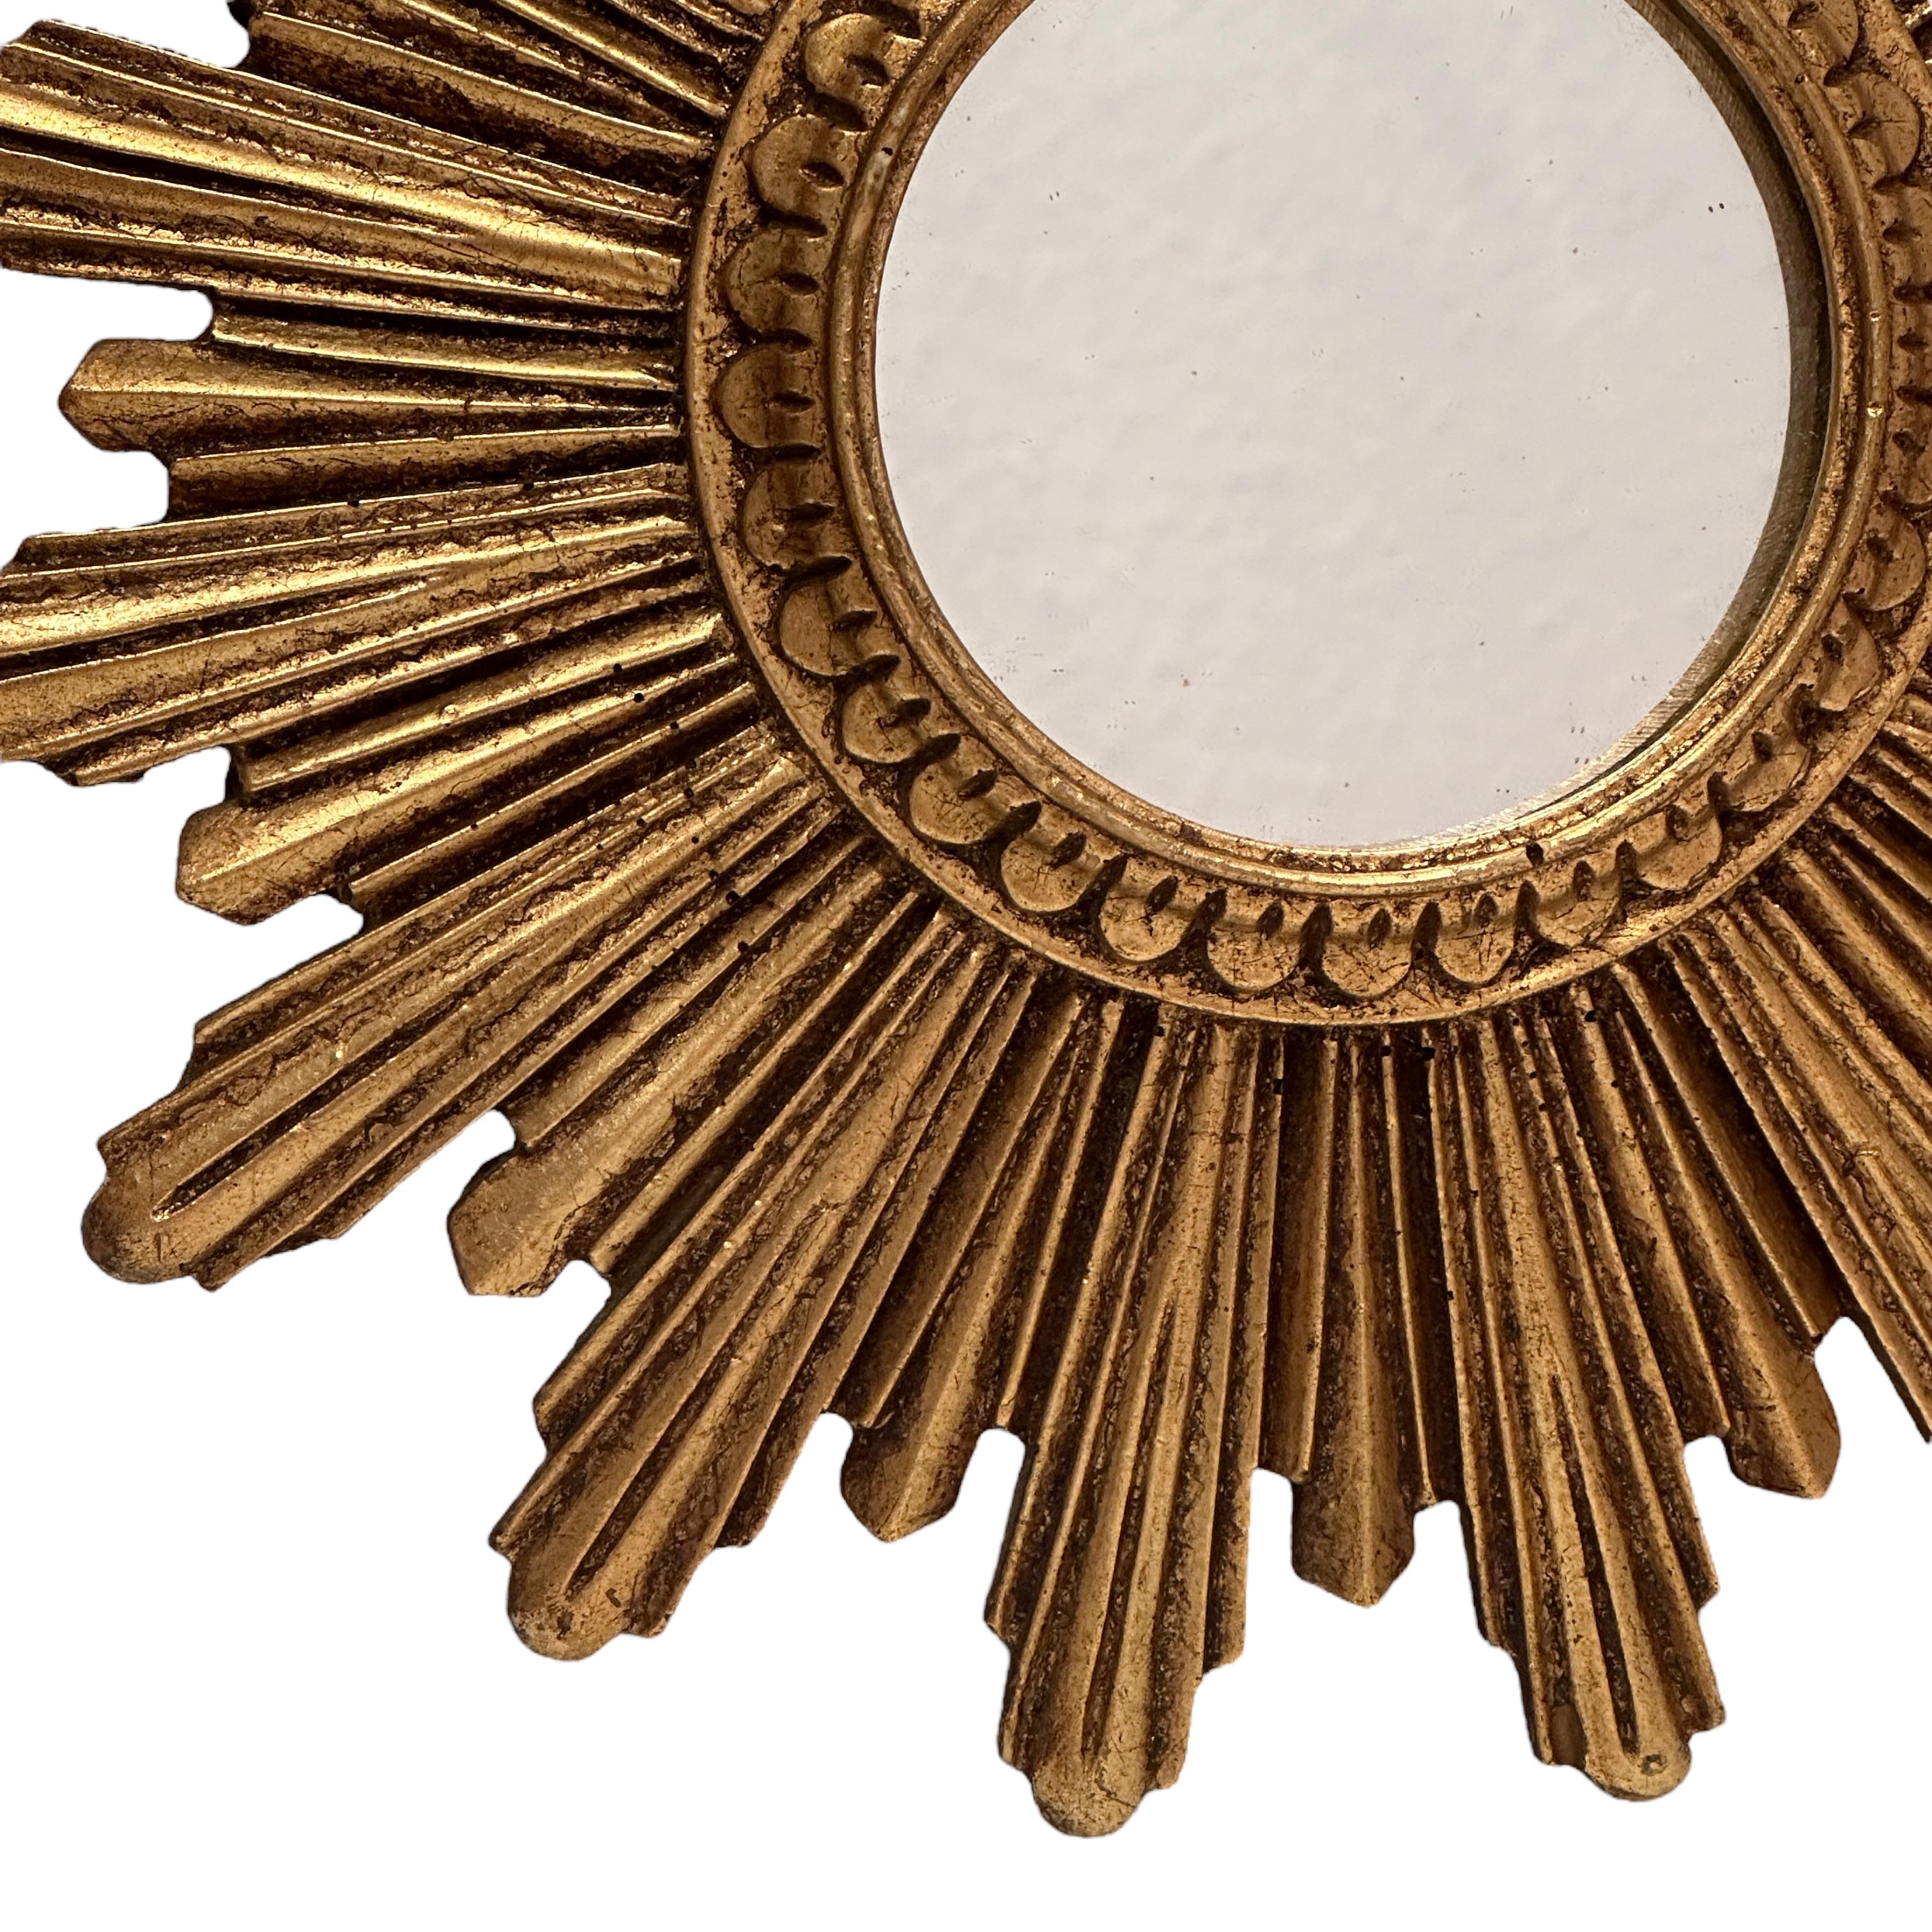 A petite starburst sunburst mirror. Made of gilded resin. It measures approximate 10.5